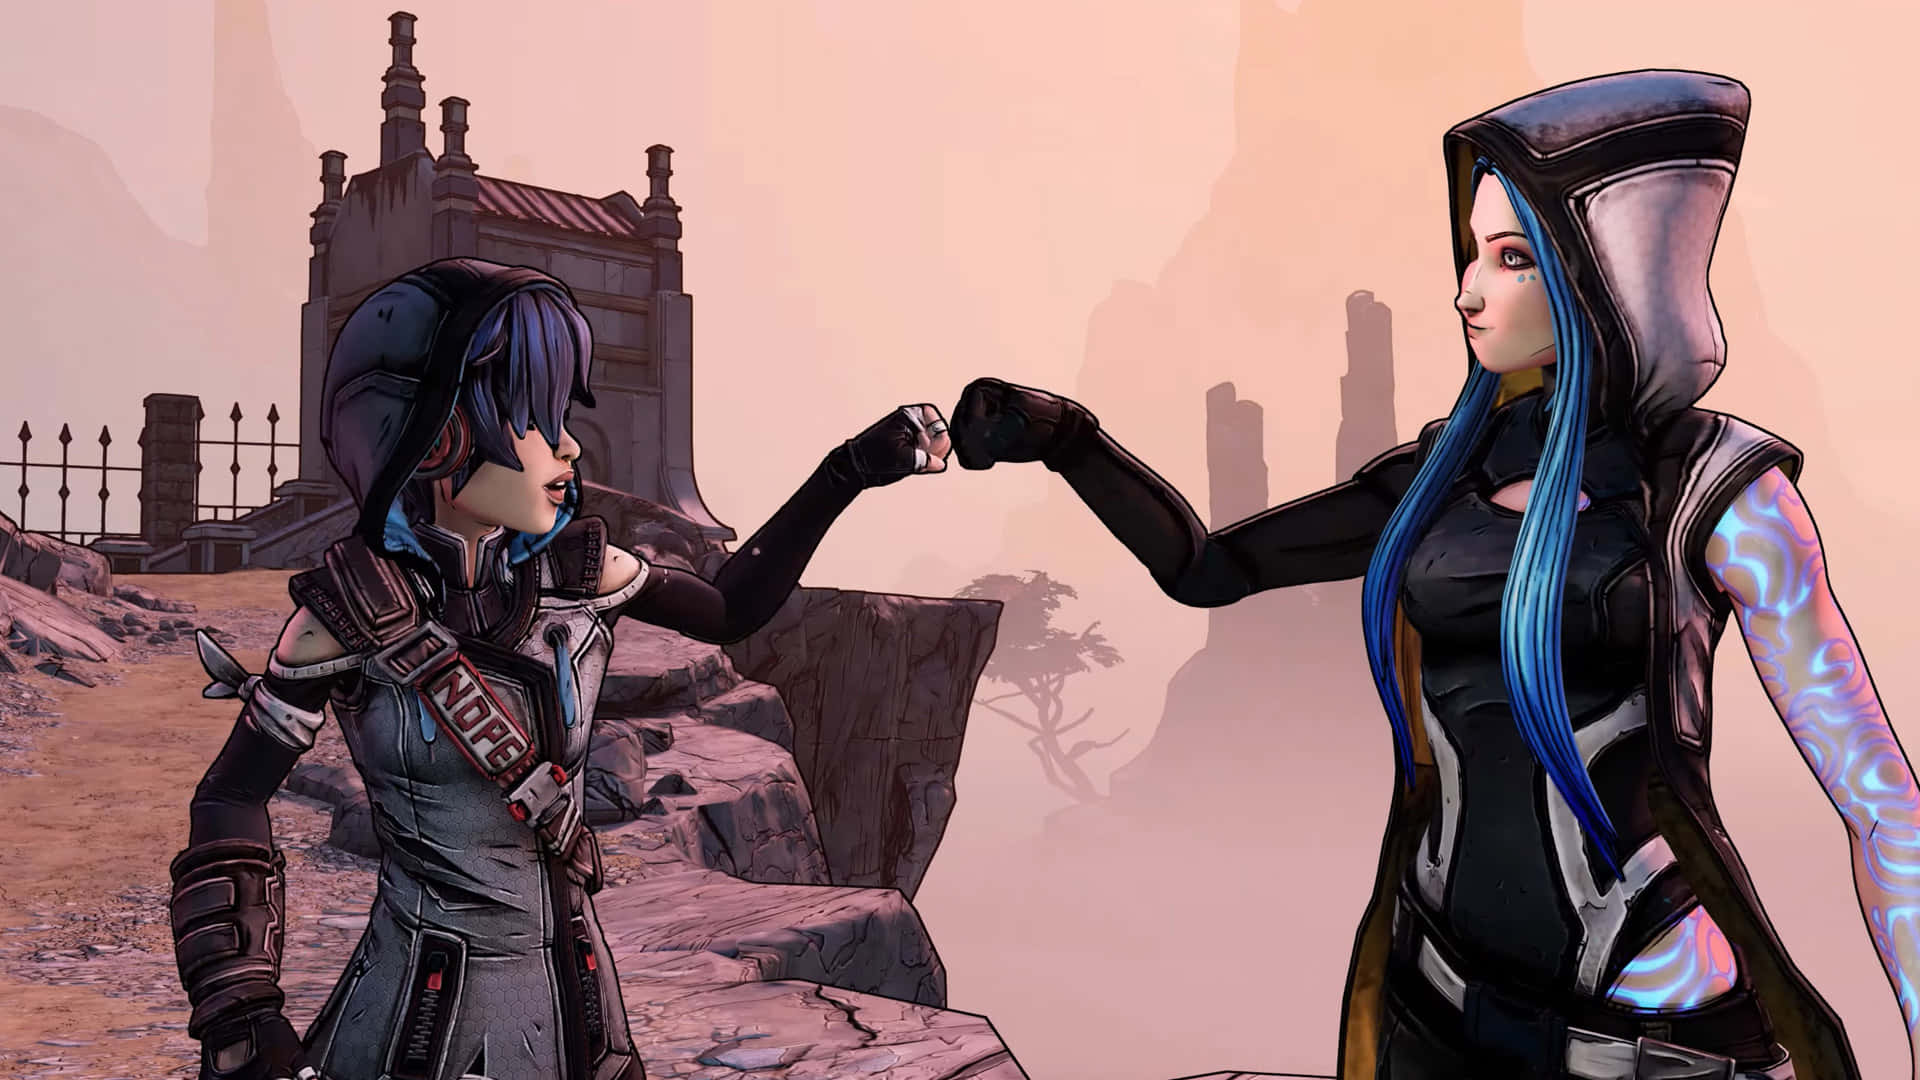 Rally your Vault Hunters and explore the new lands of Pandora in Borderlands 3